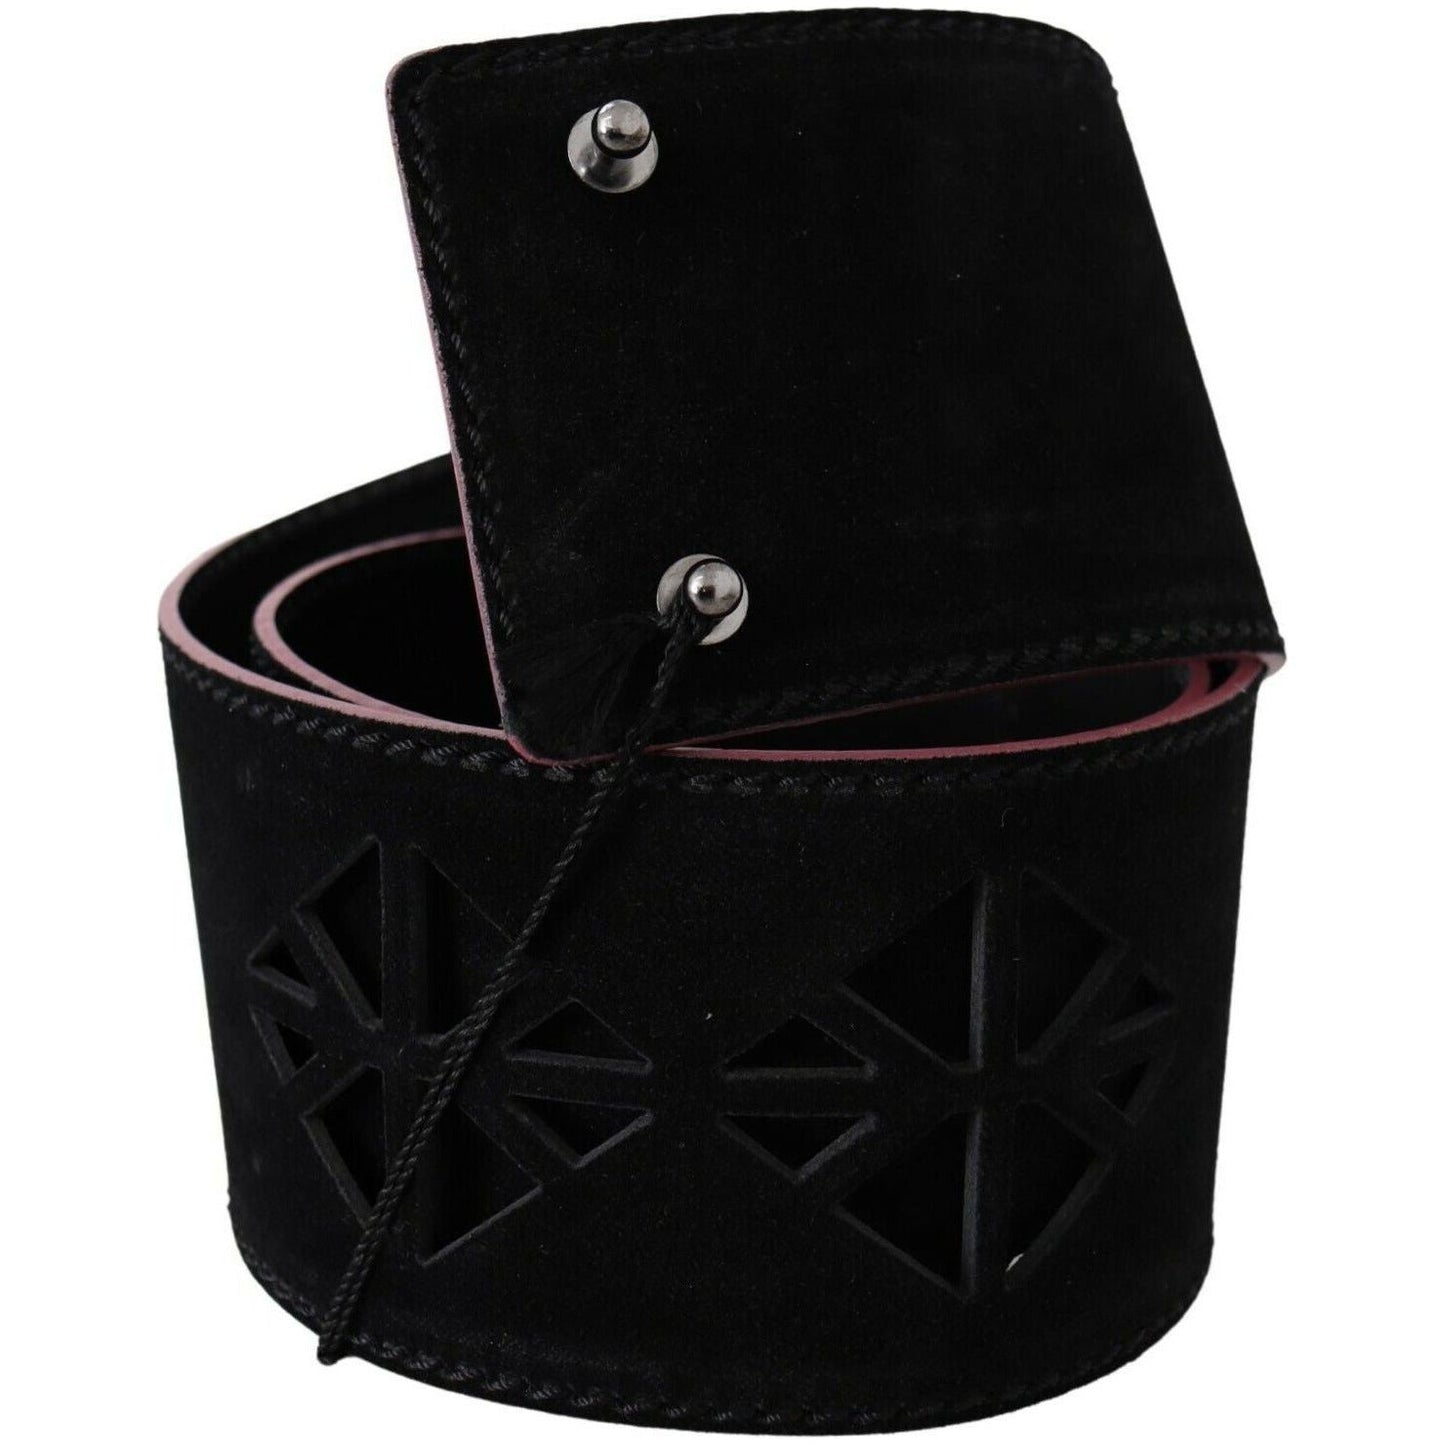 Costume National Elegant Wide Leather Fashion Belt with Metal Accents black-leather-wide-waist-studded-women-belt